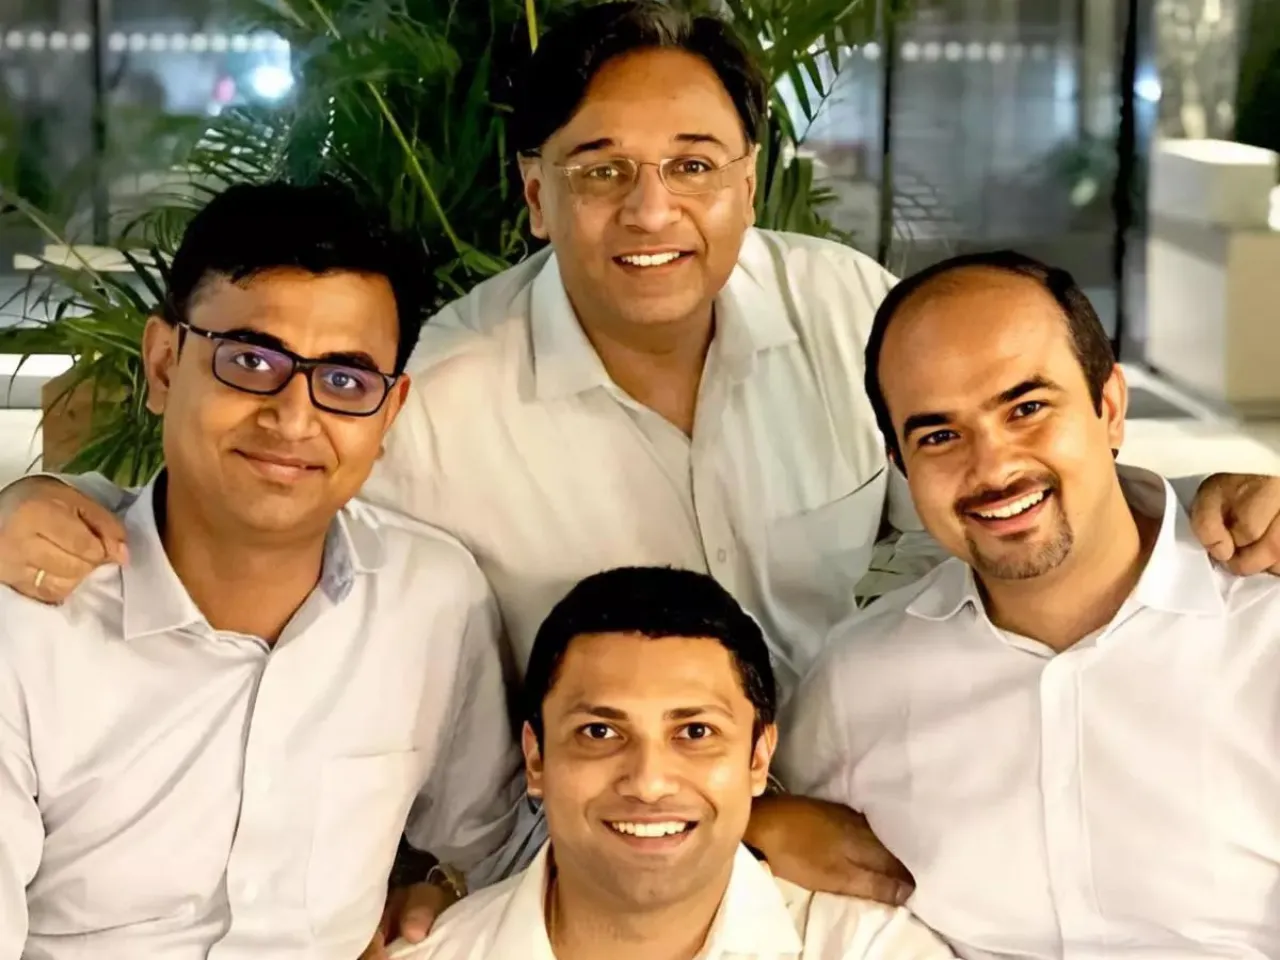 Navadhan connecting rural businesses with NBFCs and banks raises $1.5M in seed funding